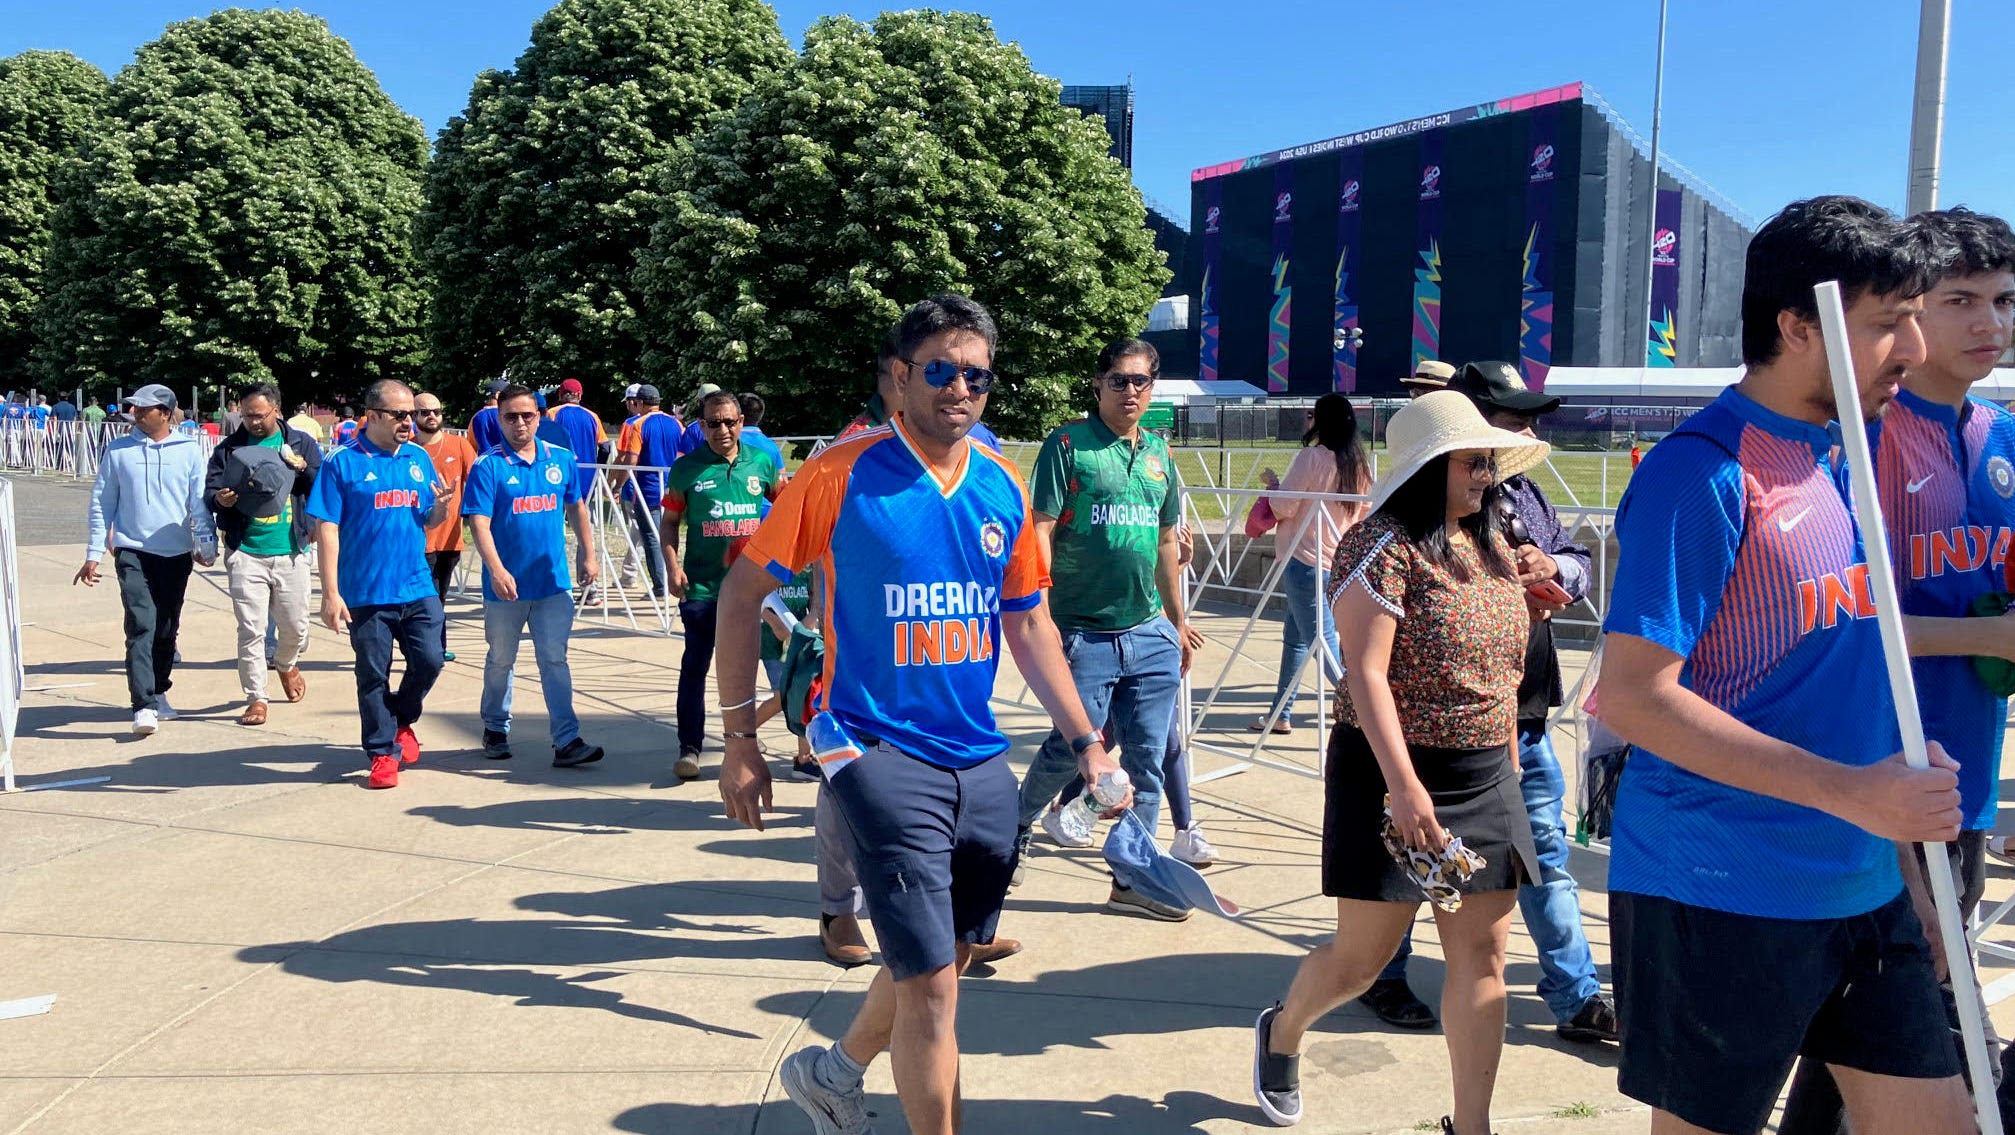 See first-hand what public transport to the Cricket World Cup on Long Island is like